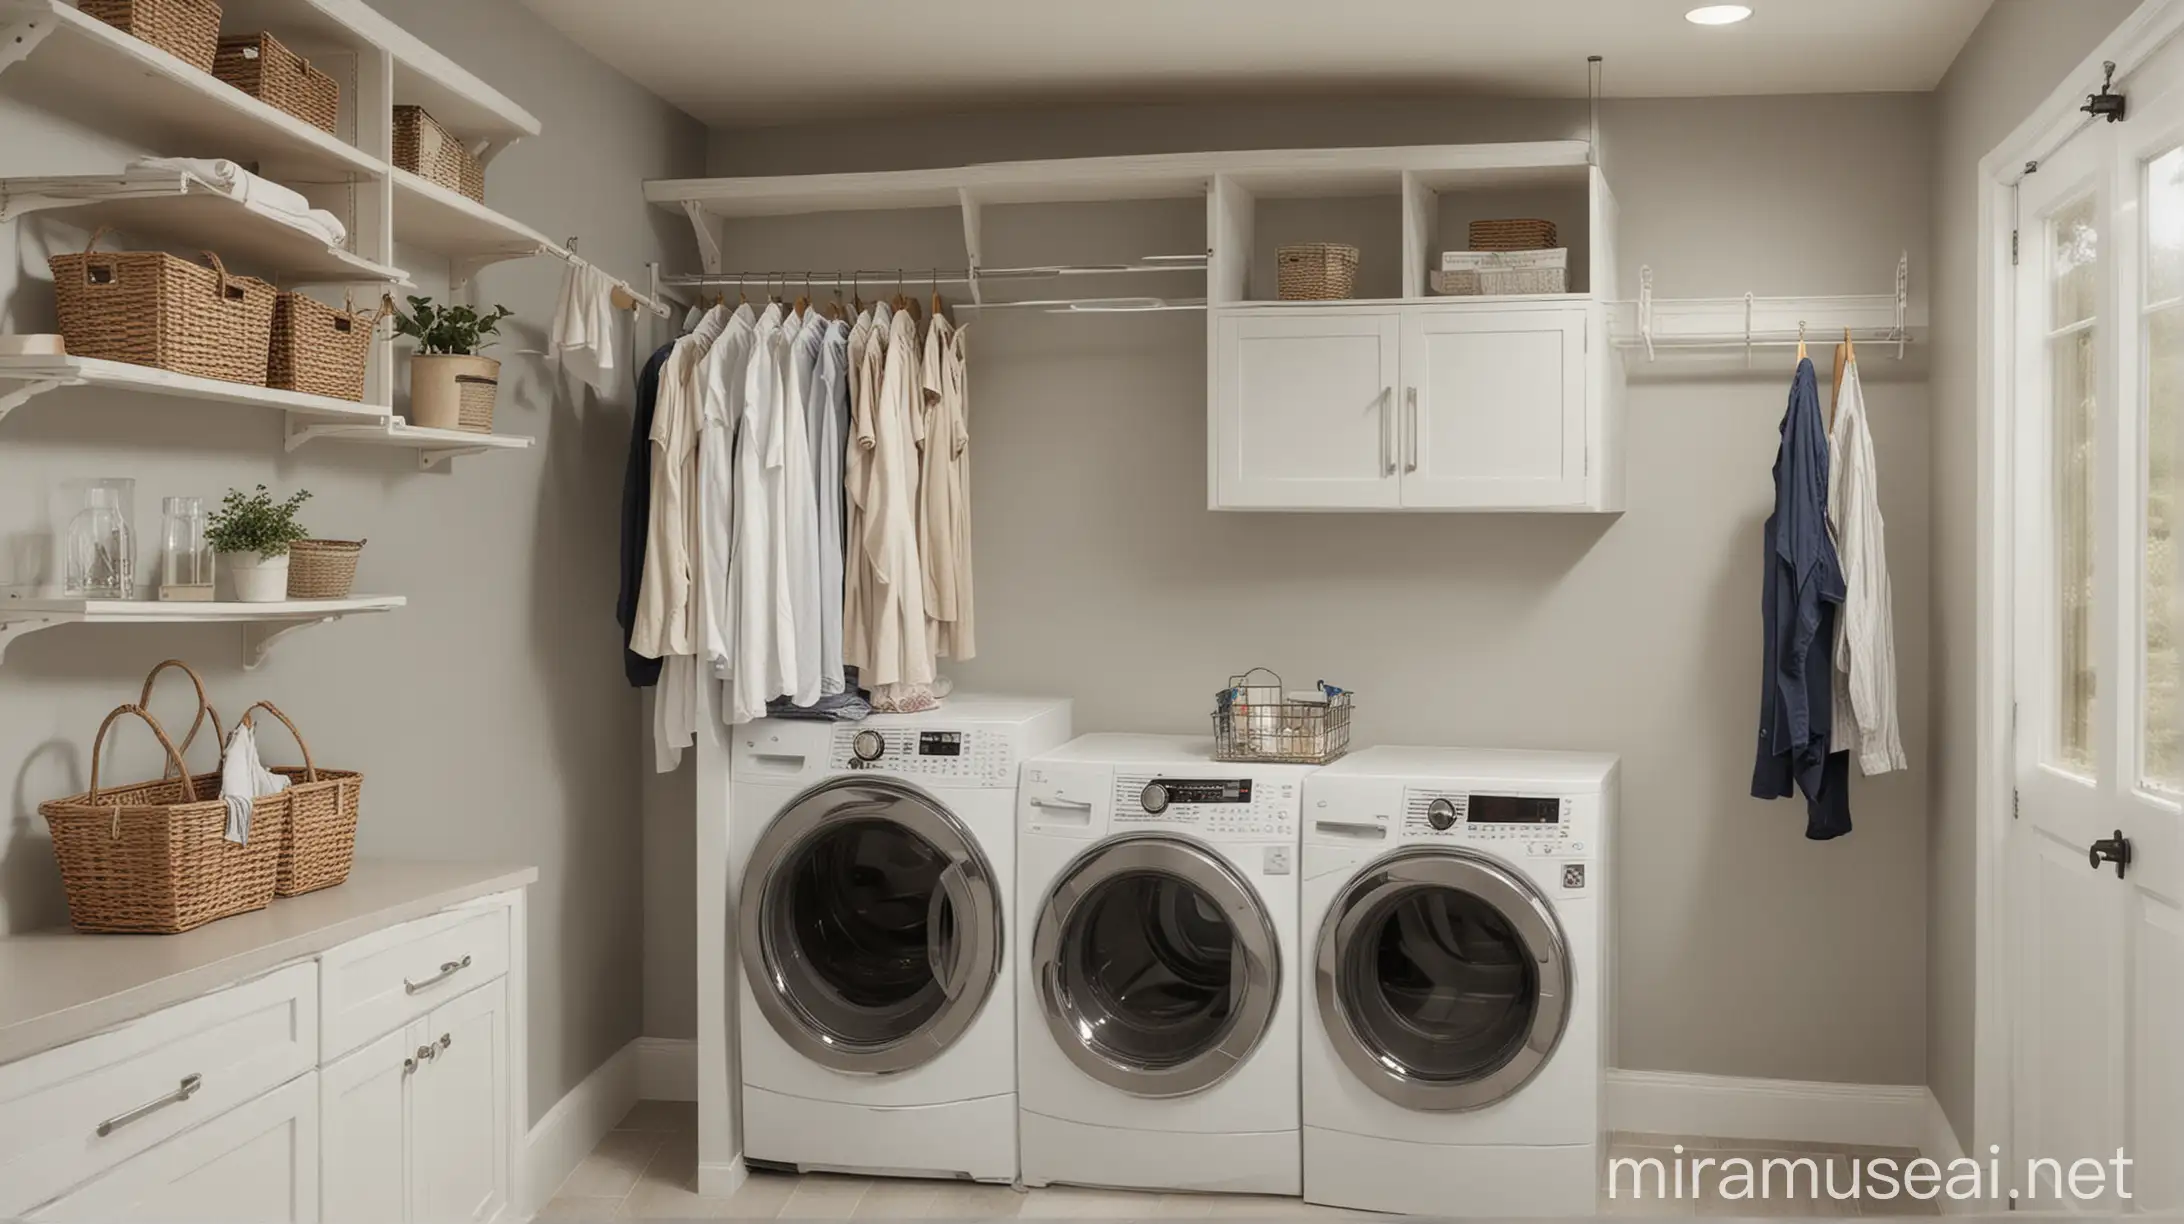 A laundry room with a hanging rack for air-drying clothes.